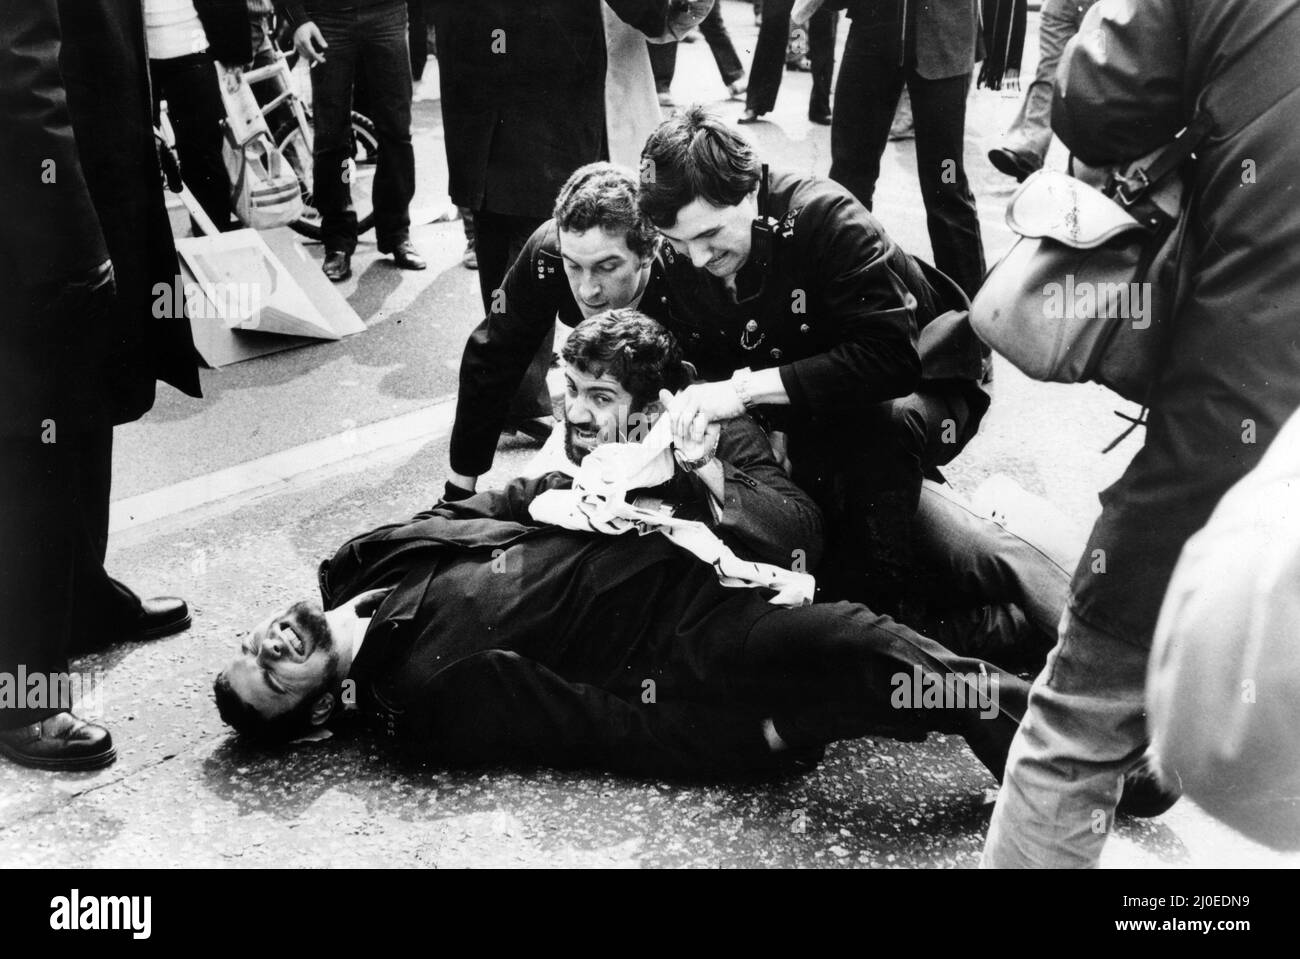 Second day of the Iranian Embassy Siege in London where six gunmen of the Iranian extremist group 'Democratic Revolutionary Movement for the Liberation of Arabistan' stormed the building, taking 26 hostages before the SAS retook the embassy and freed the hostages. Police officer Michael Perkin lies on the ground,  his face contorted in agony after having his leg broken by an angry pro Khomeini demonstrator near the Embassy building.  His colleagues rush to his aid to drag the man off. 1st May 1980. Stock Photo